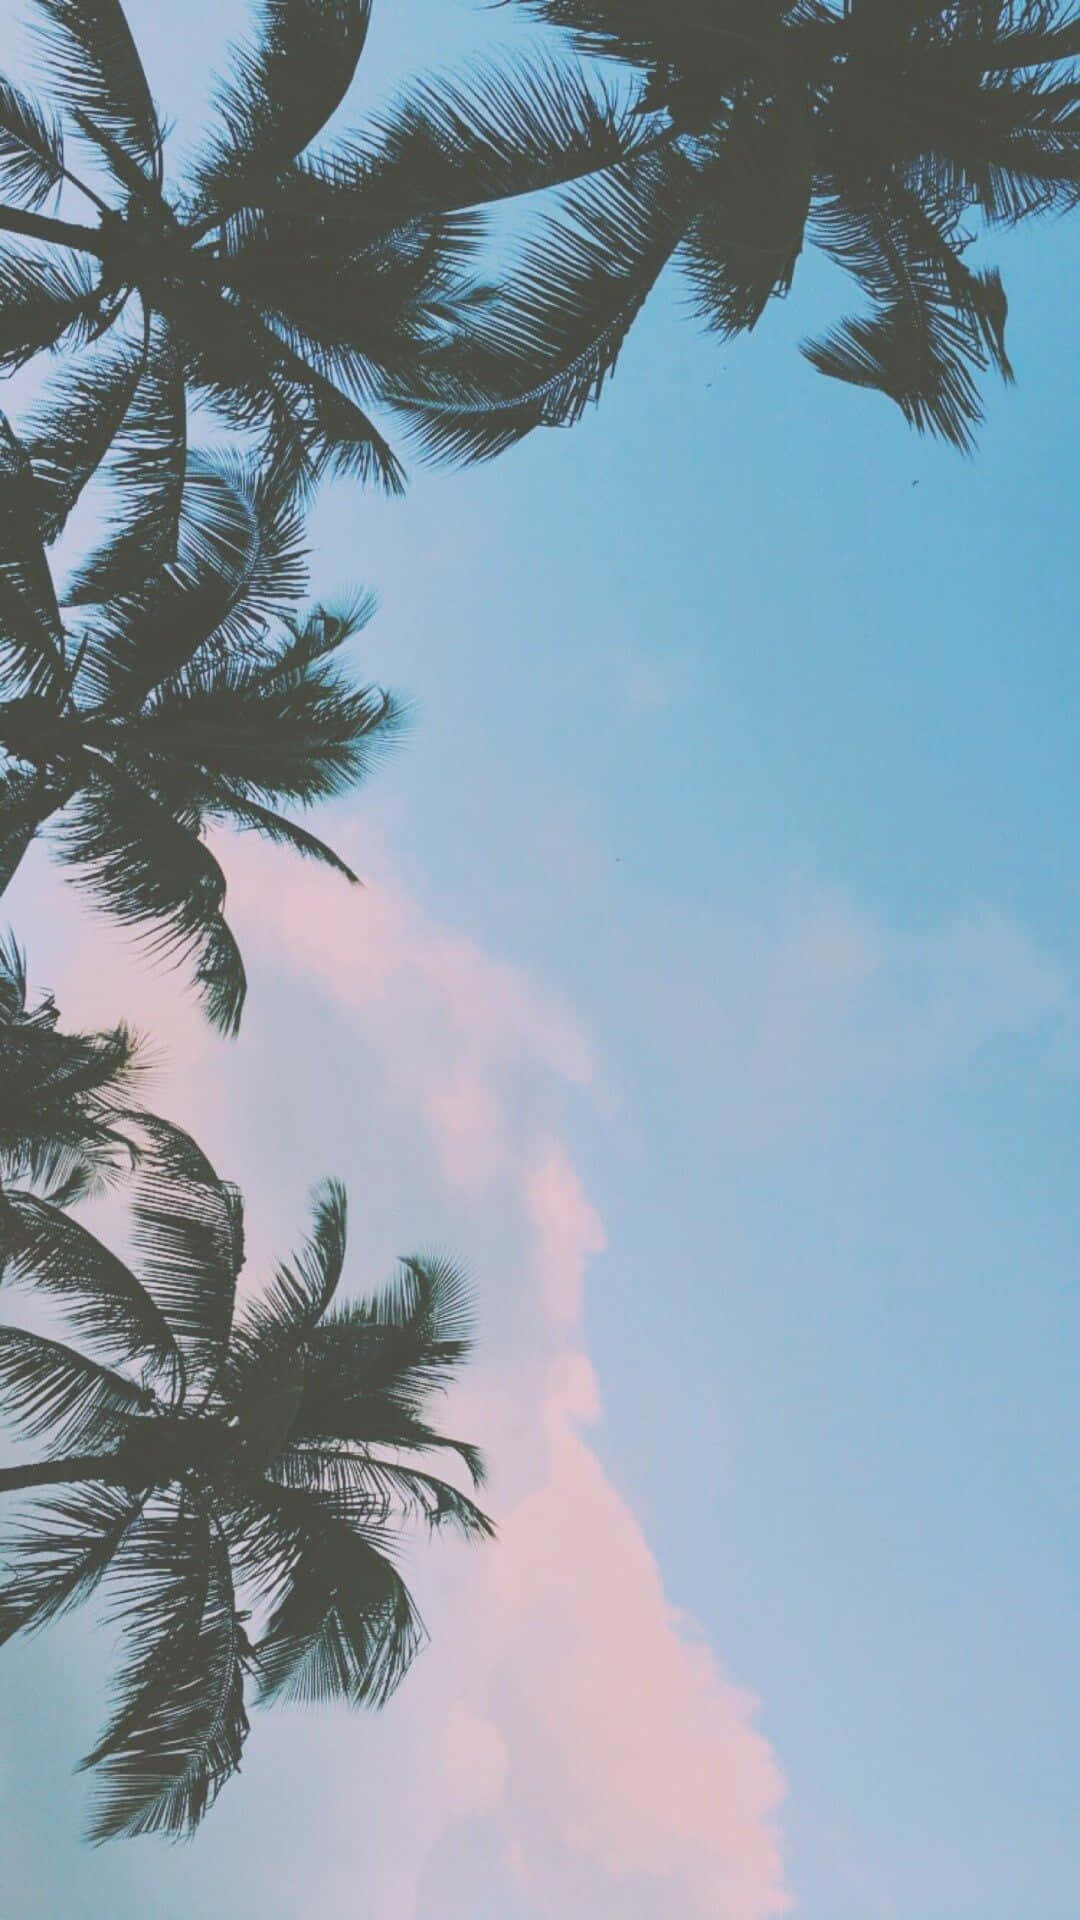 Palm Trees In The Sky Wallpaper